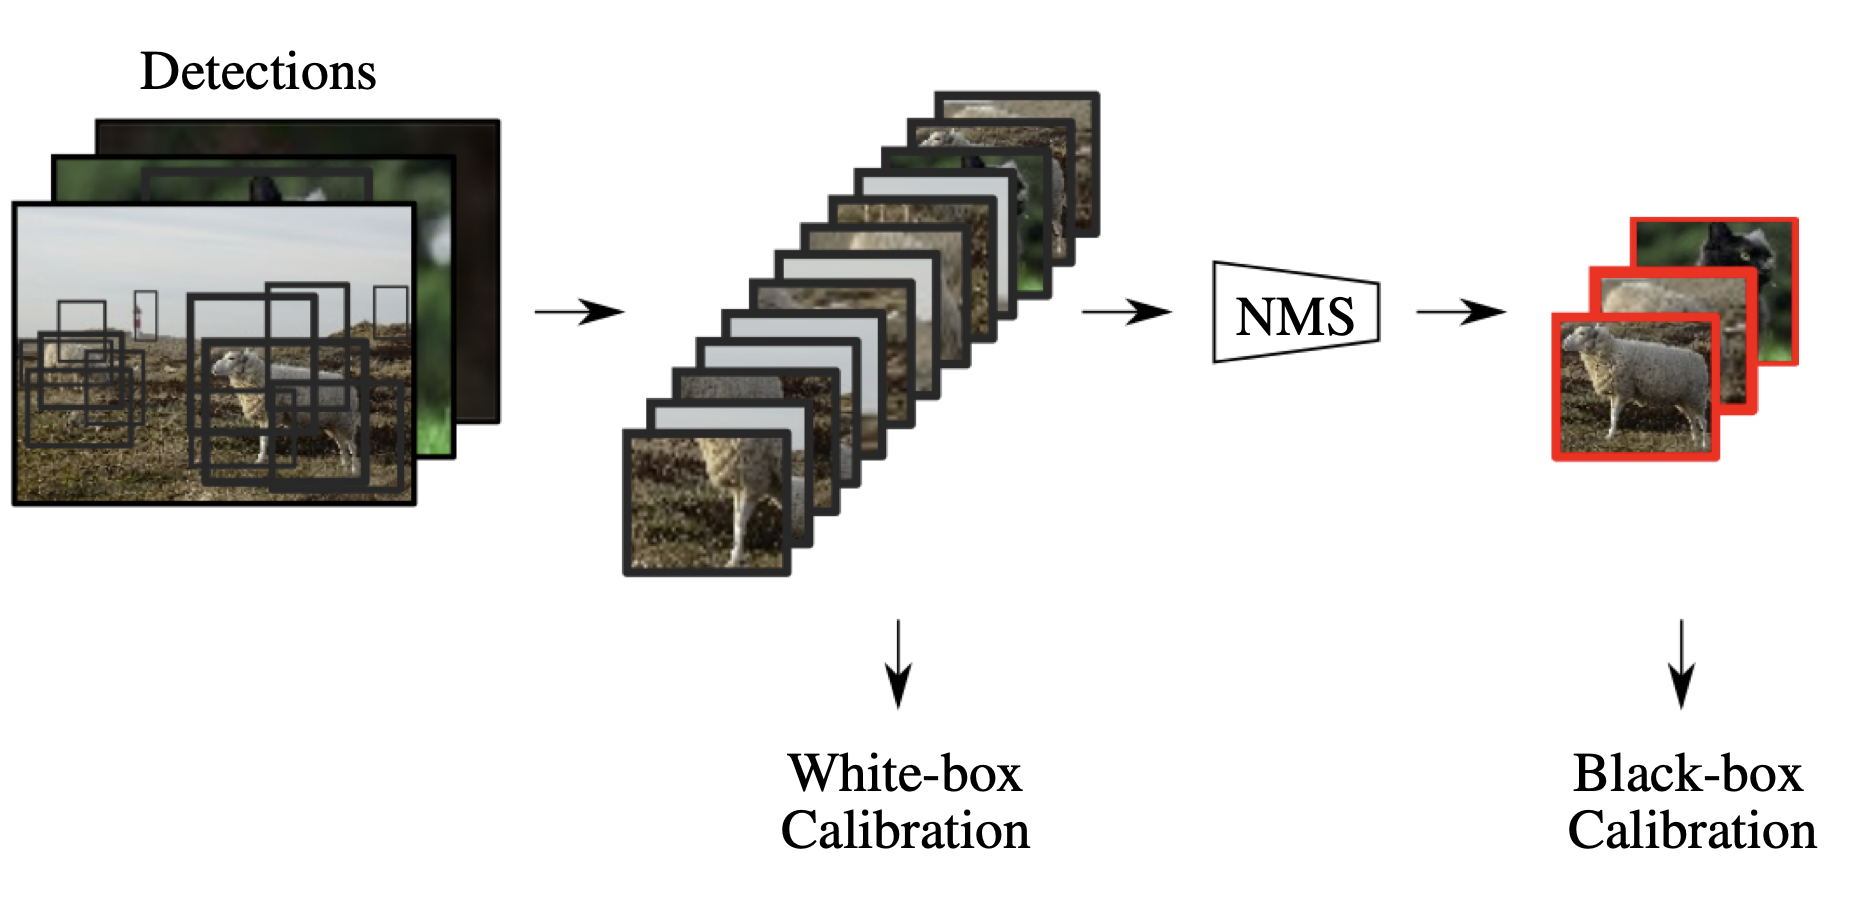 From Black-box to White-box: Examining Confidence Calibration under different Conditions